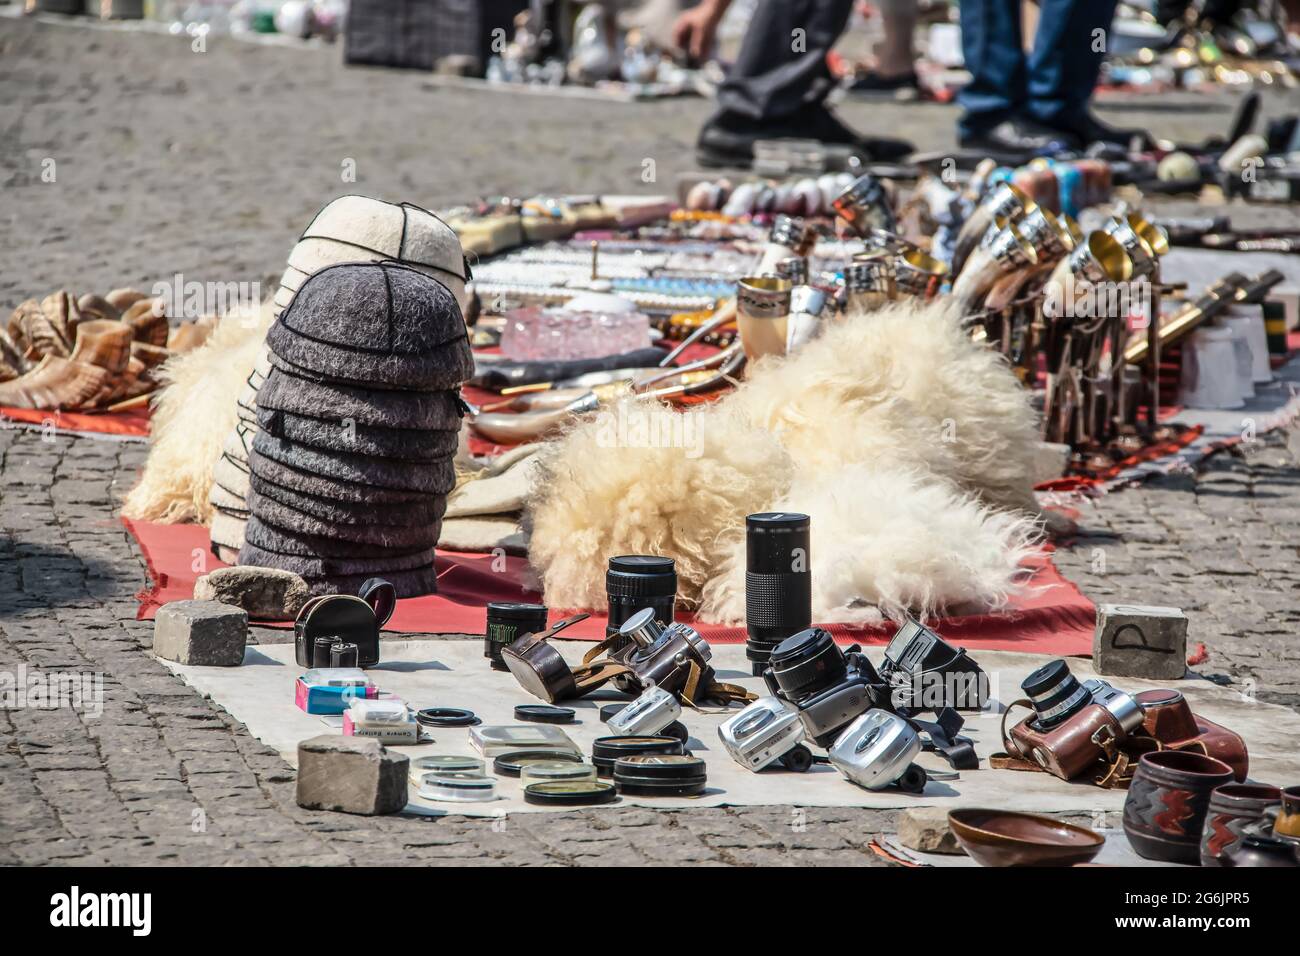 Goods spread out to sell at famous Dry Bridge Market flea market in Tbilisi Georgia include old camera equipment and traditional fur hats and drinking Stock Photo